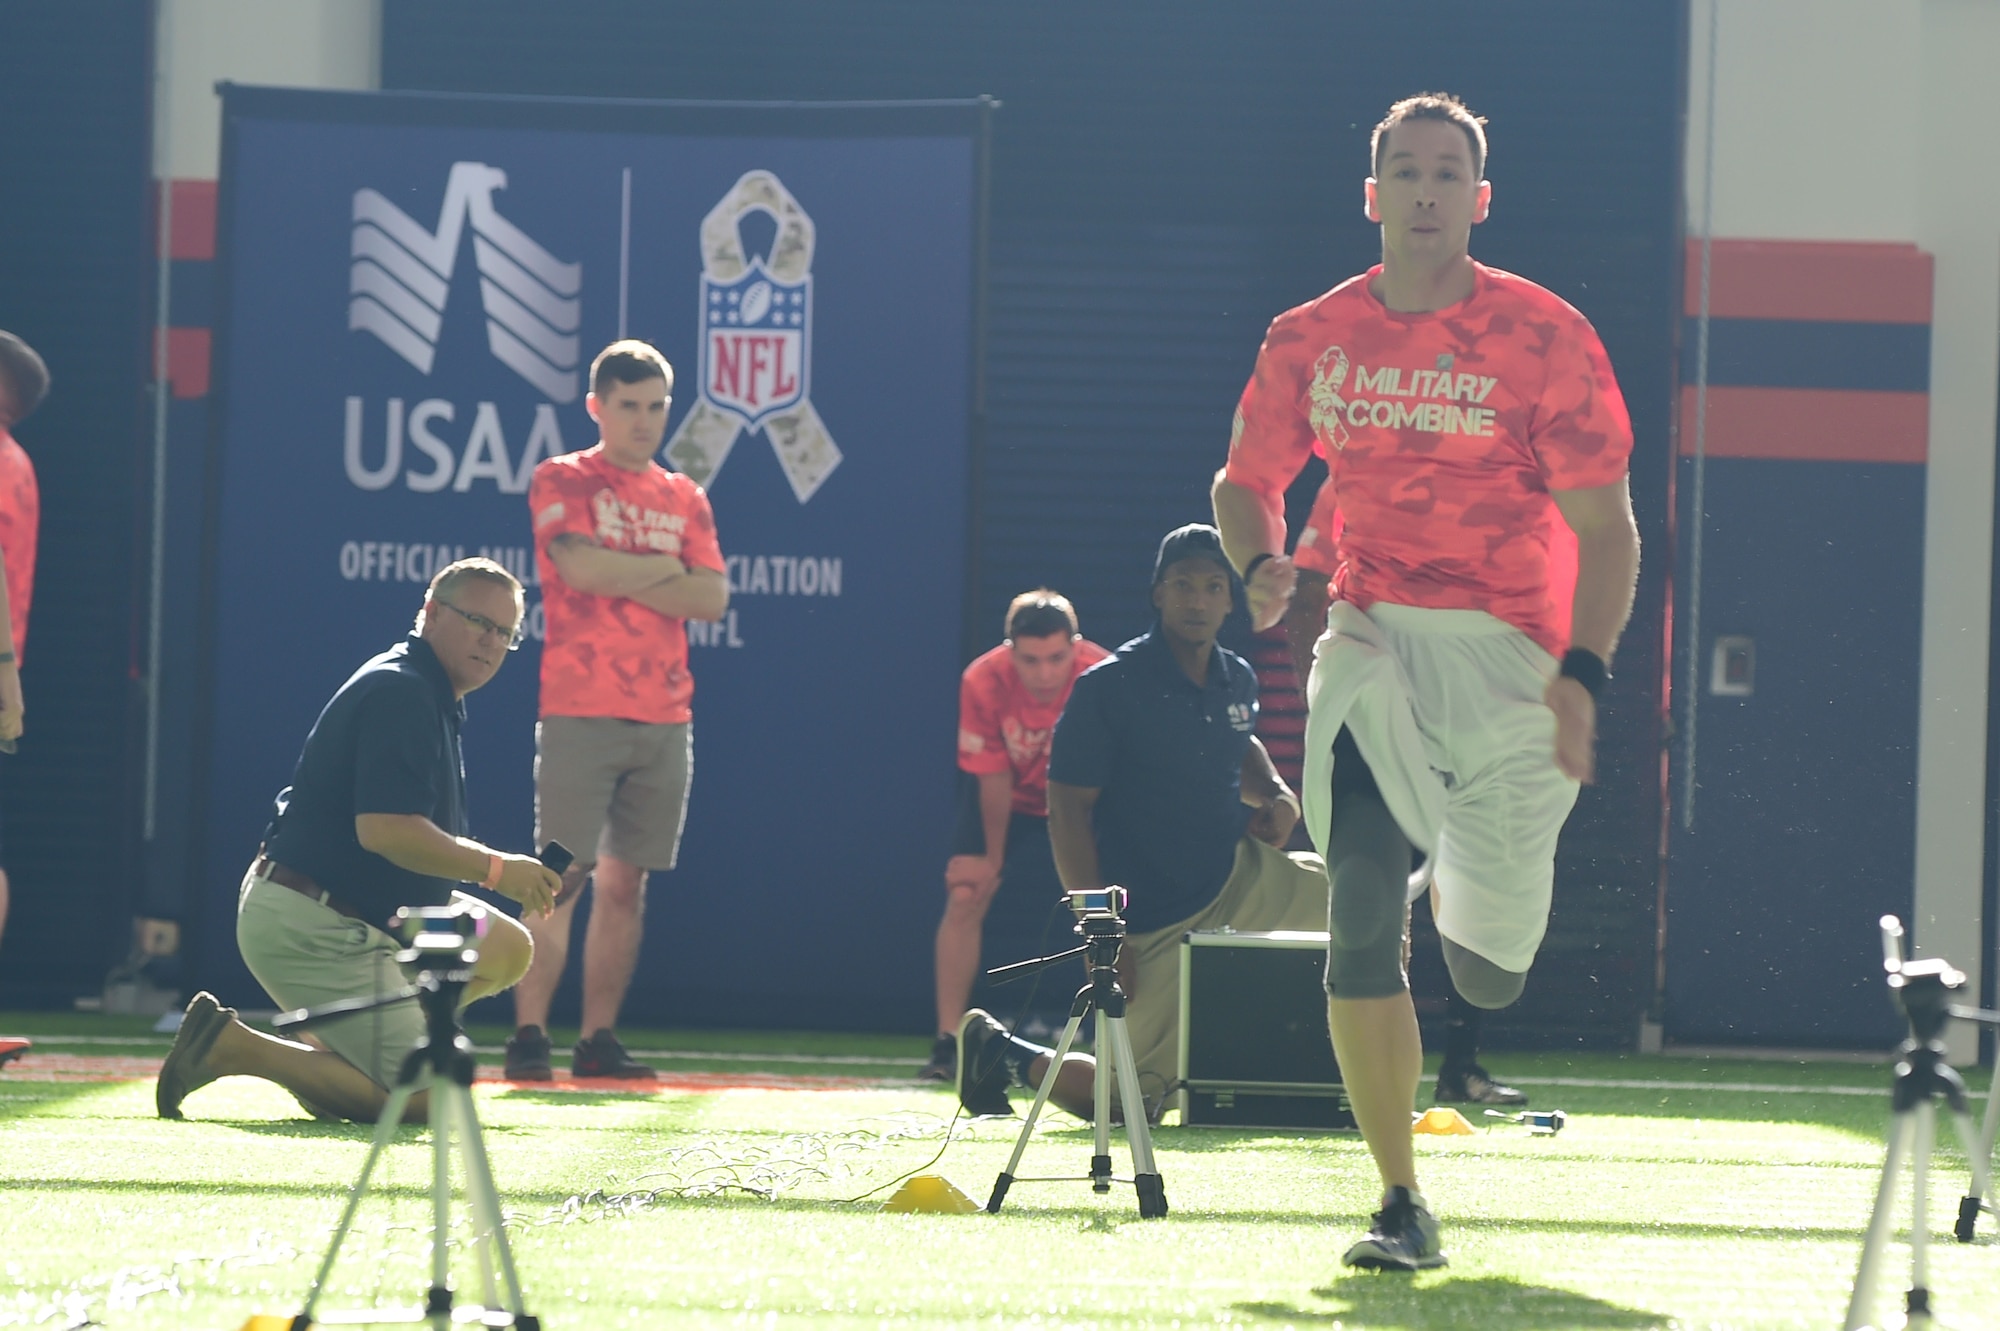 Tech. Sgt. Michael Boyd, 460th Comptroller Squadron finance superintendent, runs a timed 40- yard dash at the military combine Aug. 7, 2015, at the Denver Broncos Headquarters Facility at Dove Valley in Denver.  The combine consisted of drills similar to the ones prospective National Football League players are expected to complete during the NFL combine held in Indianapolis before the NFL draft. All participants were also treated to a viewing of the Broncos’ Friday morning practice and a visit from Broncos players, as well as the head coach. (U.S. Air Force photo by Airman 1st Class Luke W. Nowakowski/Released)